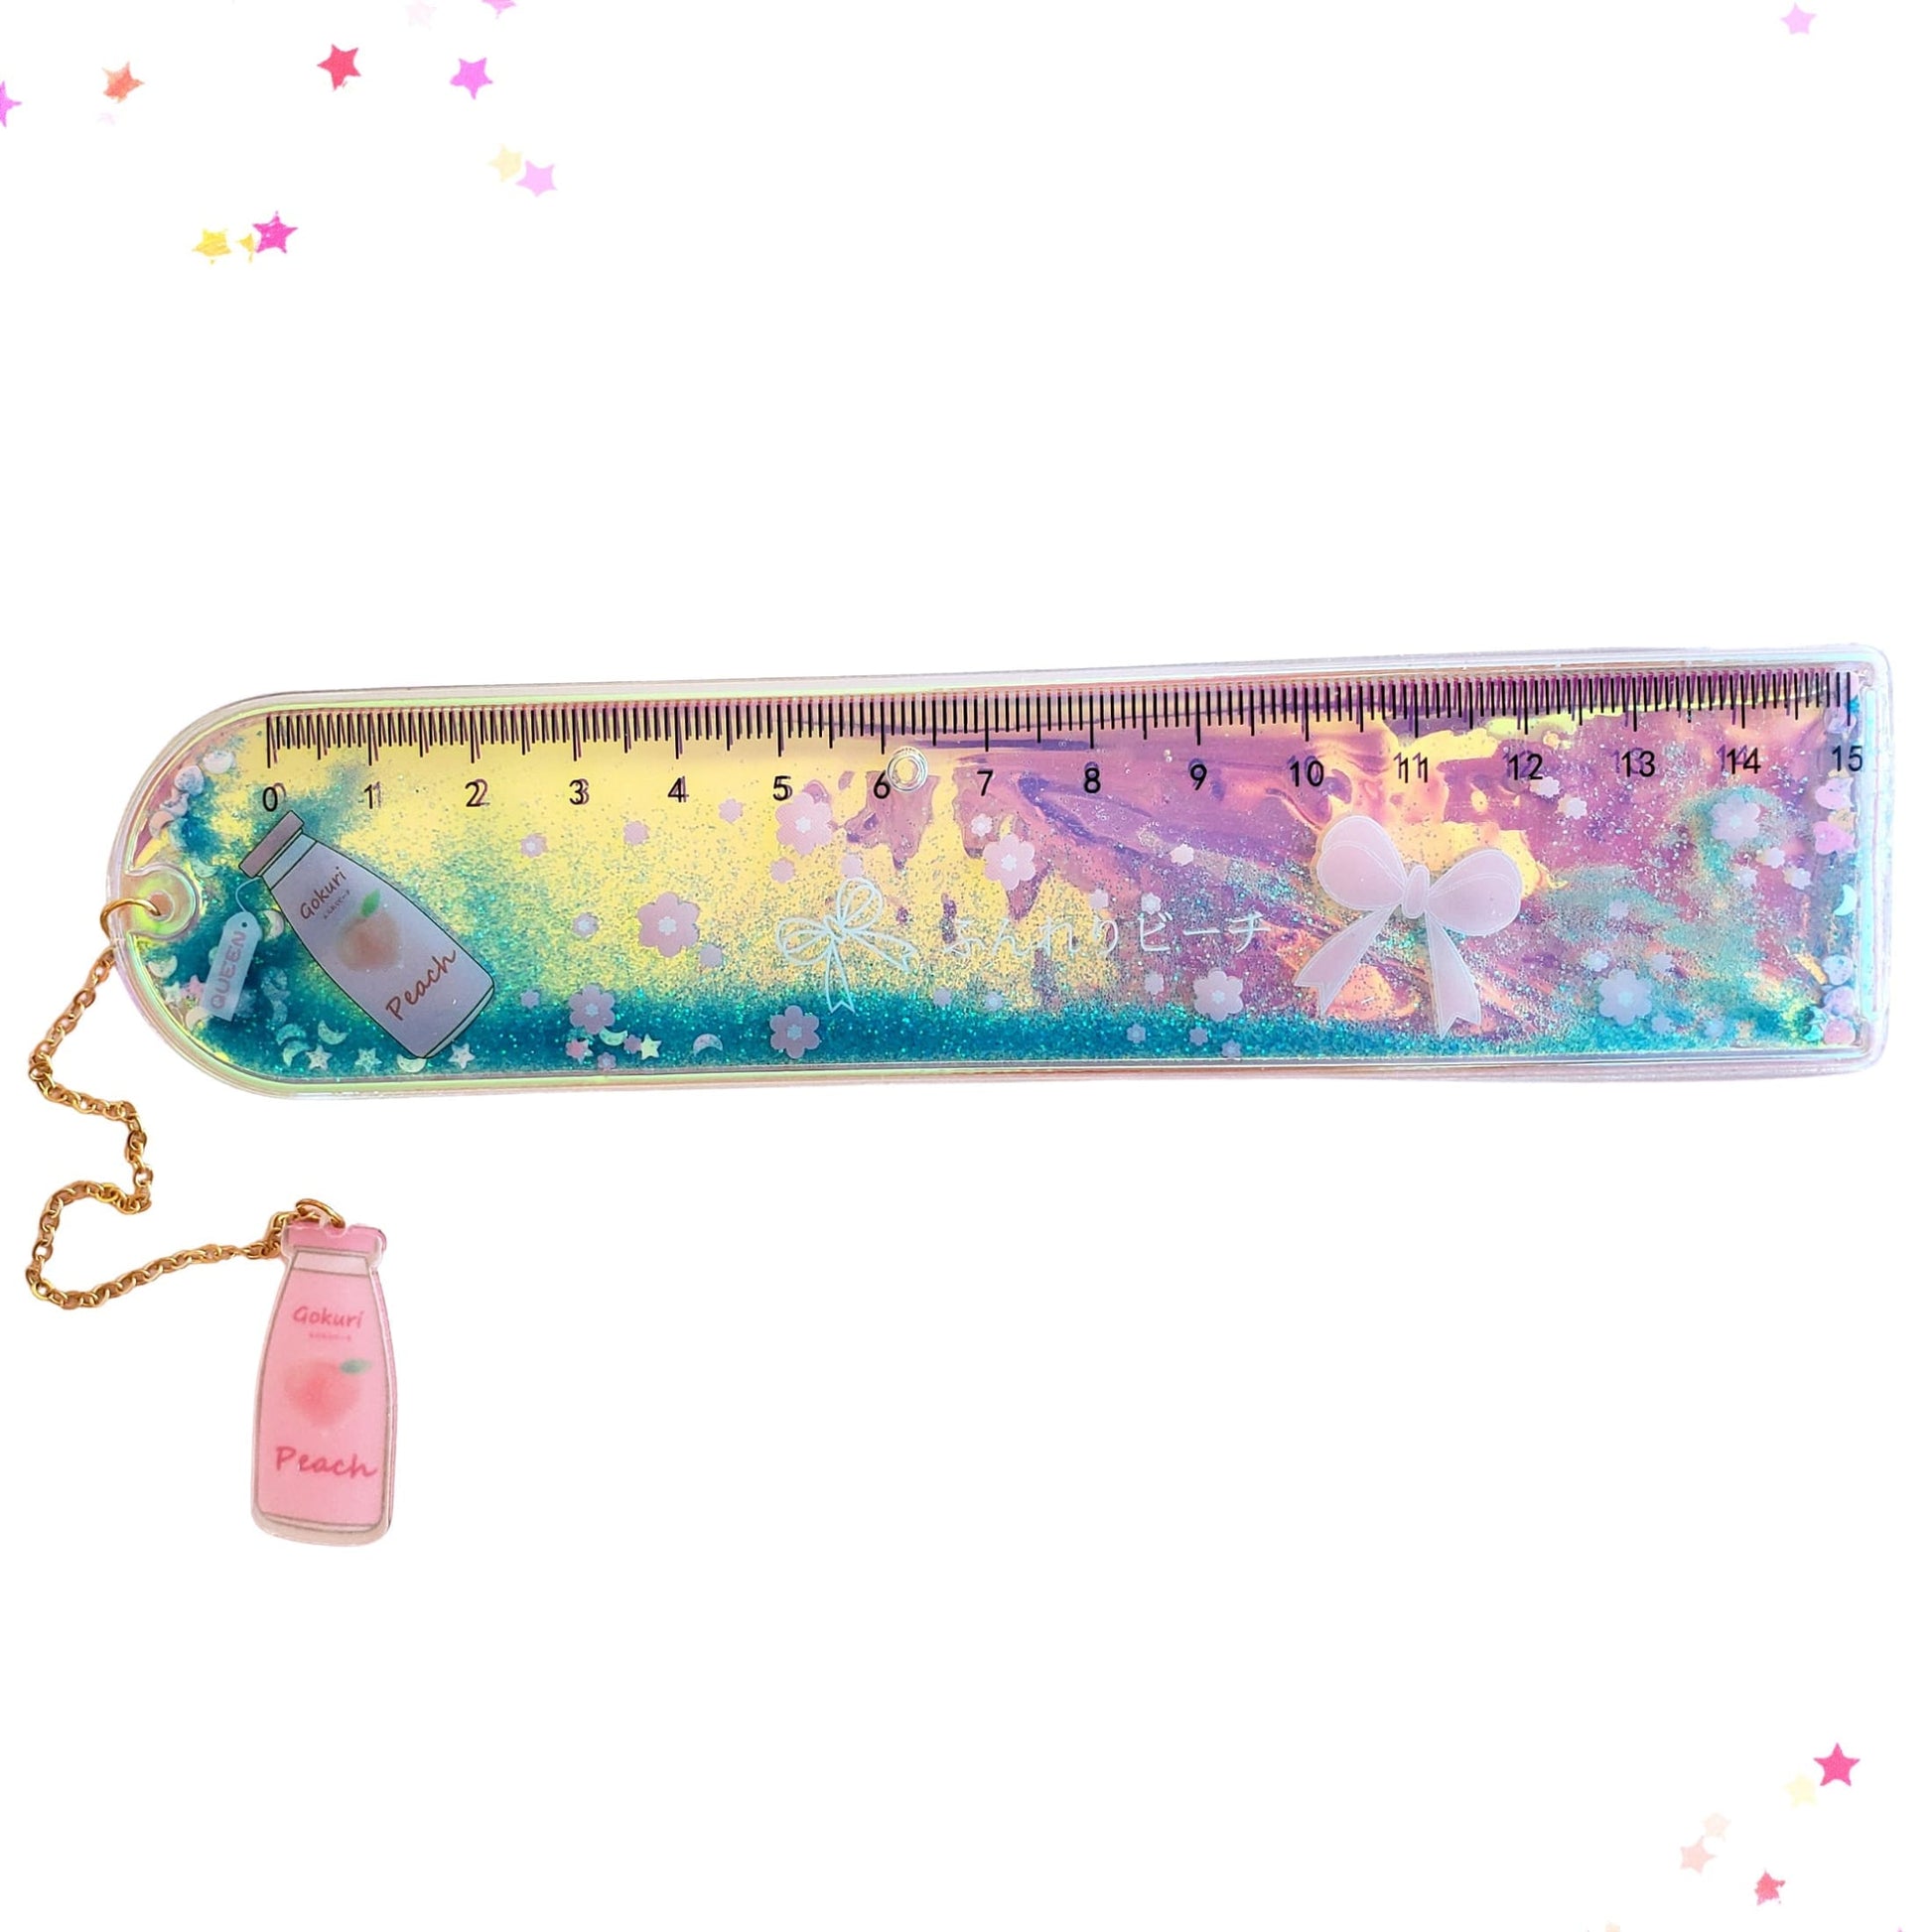 Sequin and Sand Liquid Quicksand Ruler from Confetti Kitty, Only 7.99